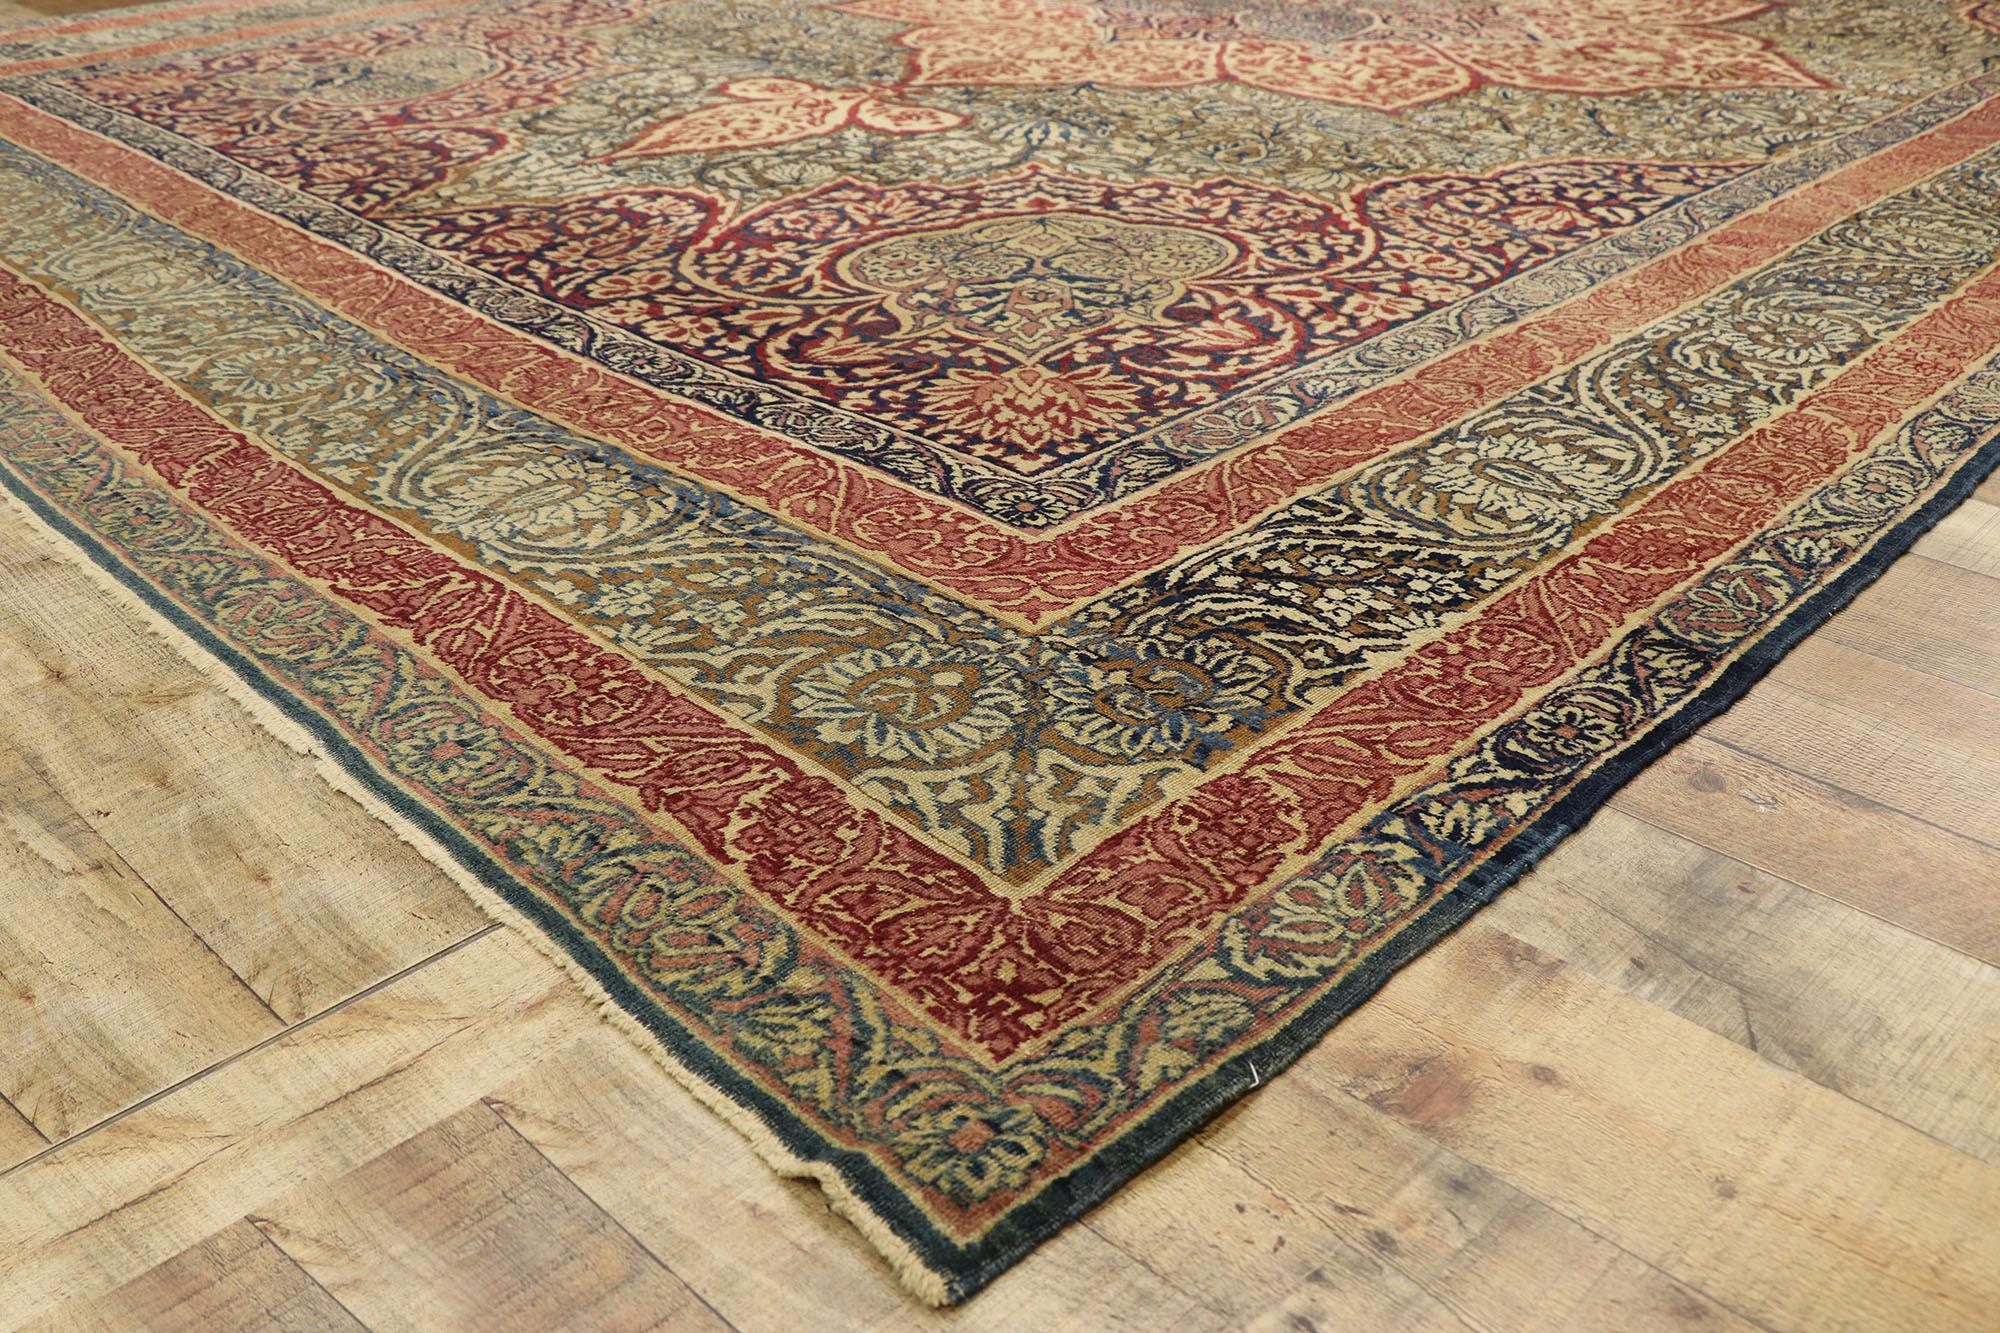 Antique Persian Kermanshah Rug with William Morris Arts & Crafts Style In Good Condition For Sale In Dallas, TX